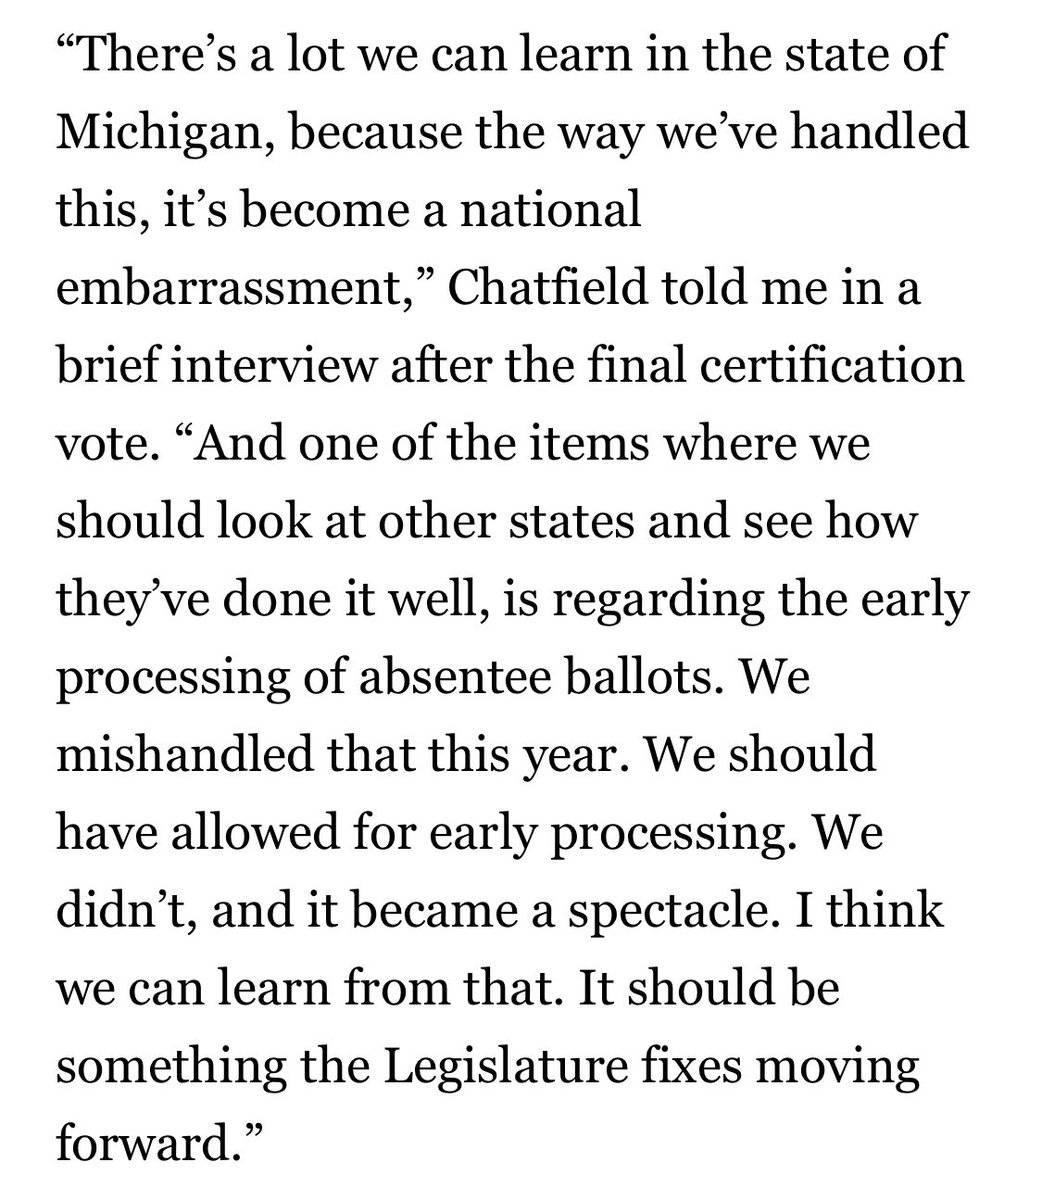 Some credit goes to Lee Chatfield, the Republican House speaker in Michigan, who refused to allow pre-processing—and now admits that was a mistake.Will Republican leaders in other states follow suit? Hopefully. But I fear a tremendous amount of damage is already done.